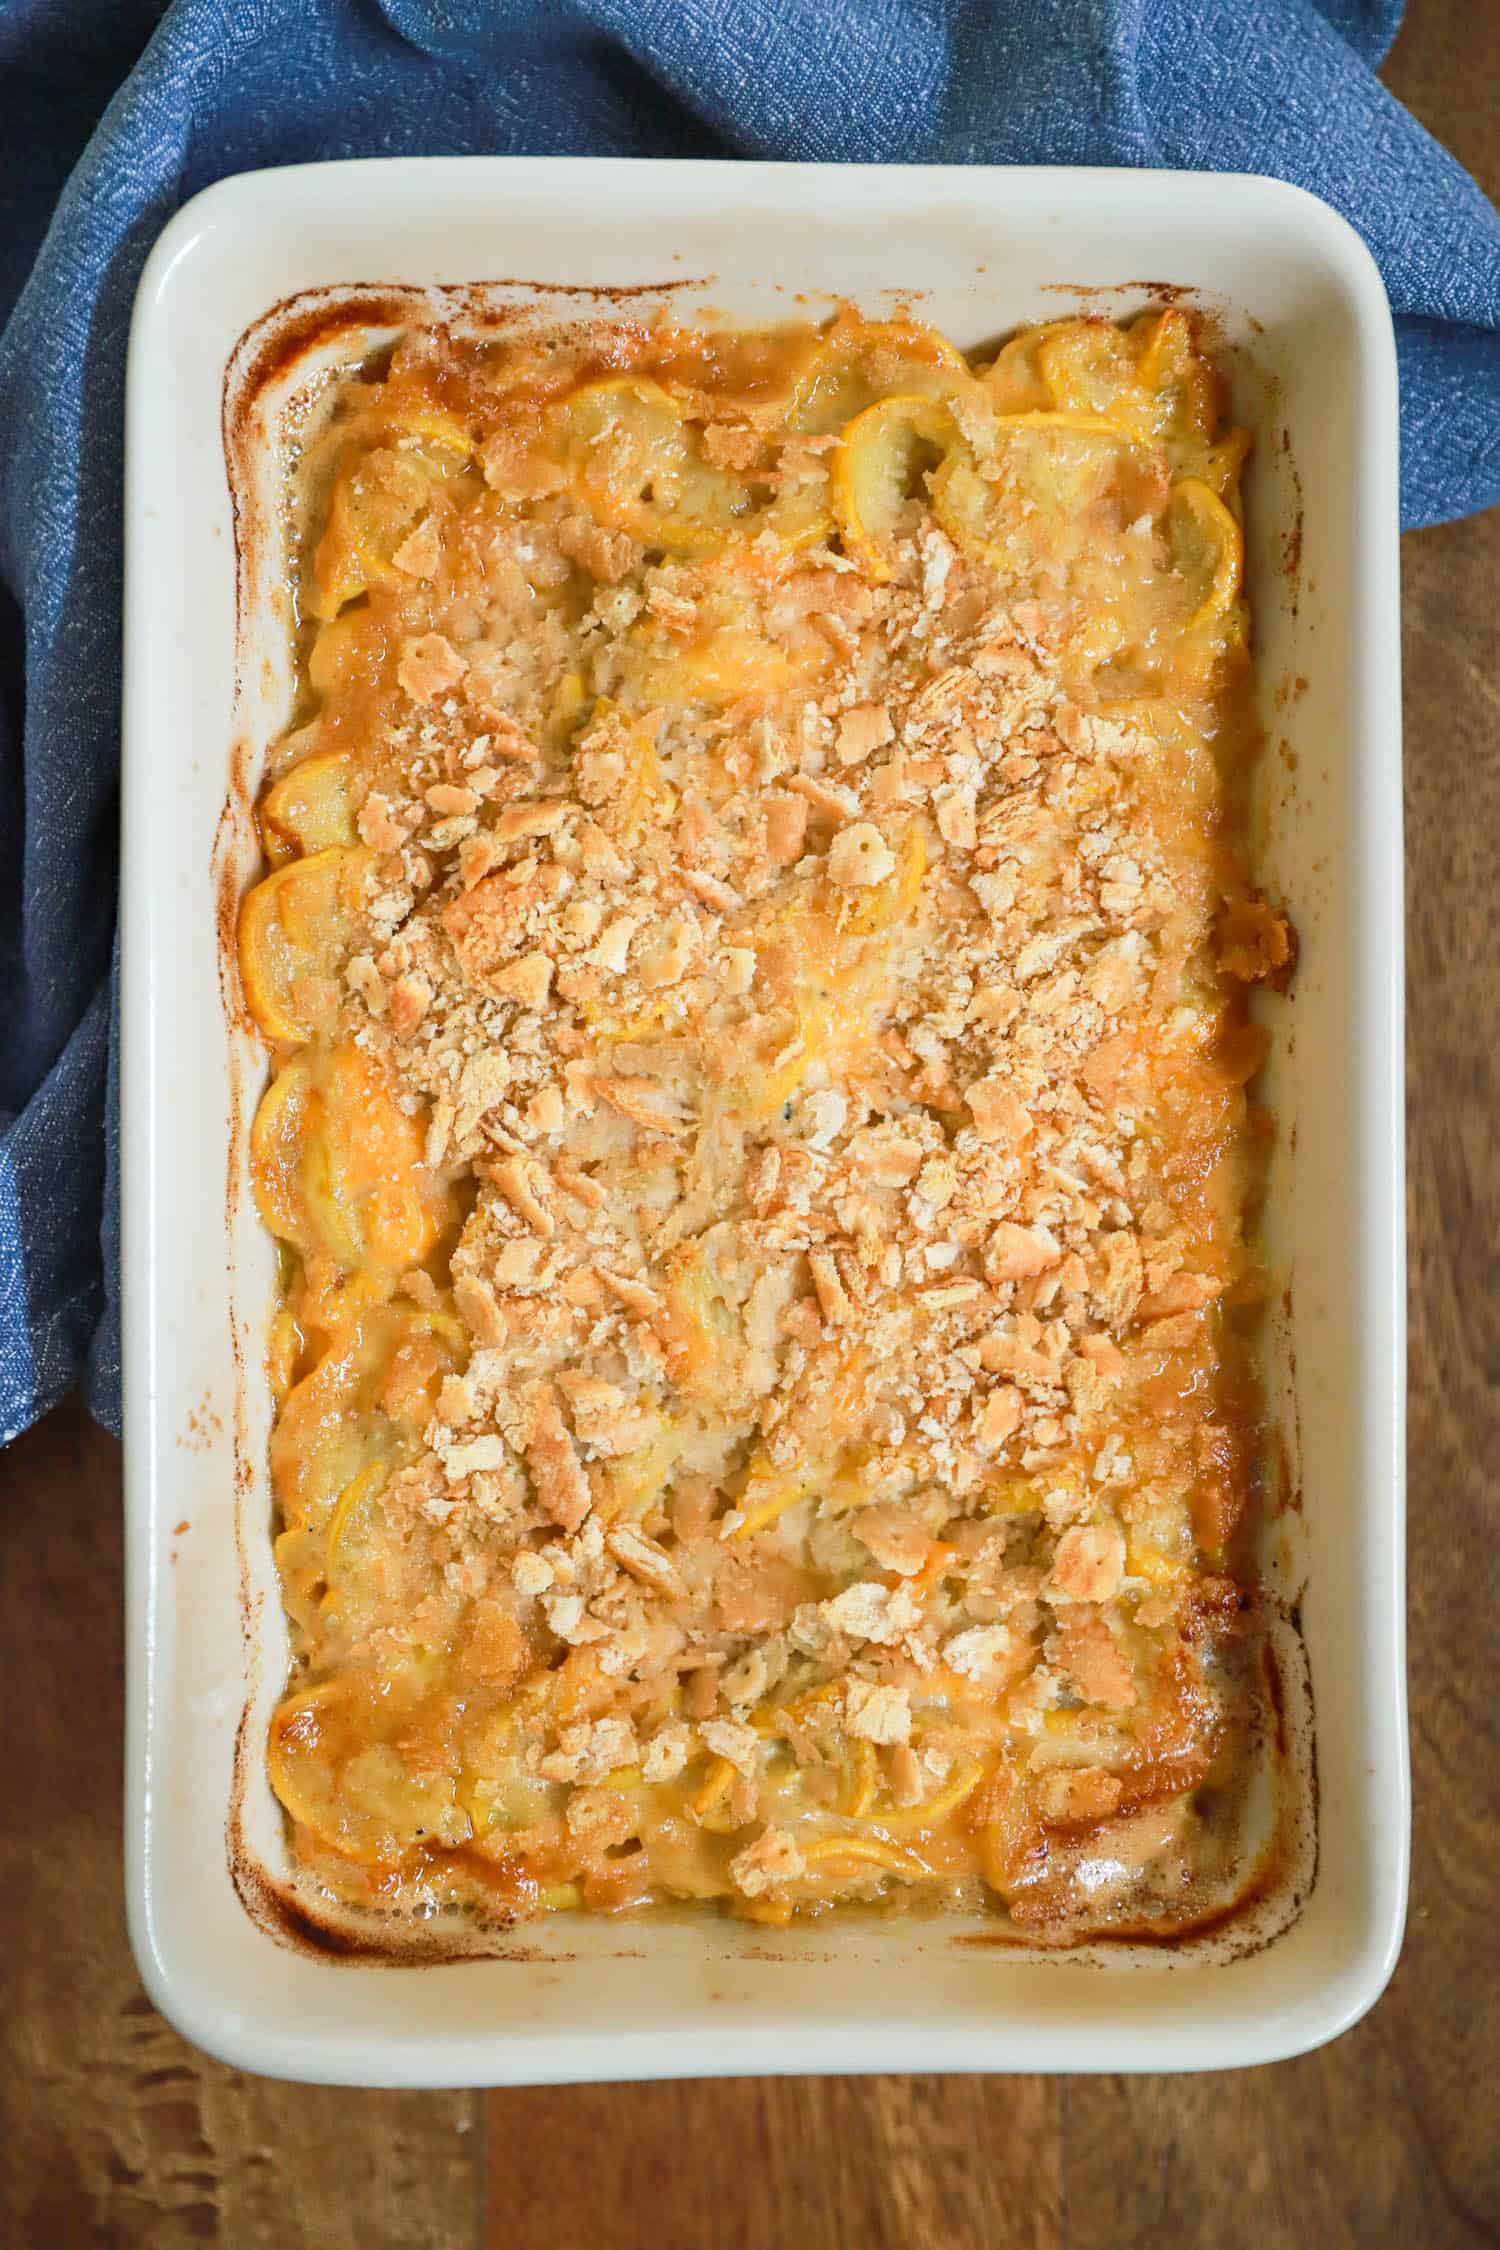 Top view of squash casserole with Ritz crackers in a large baking dish.